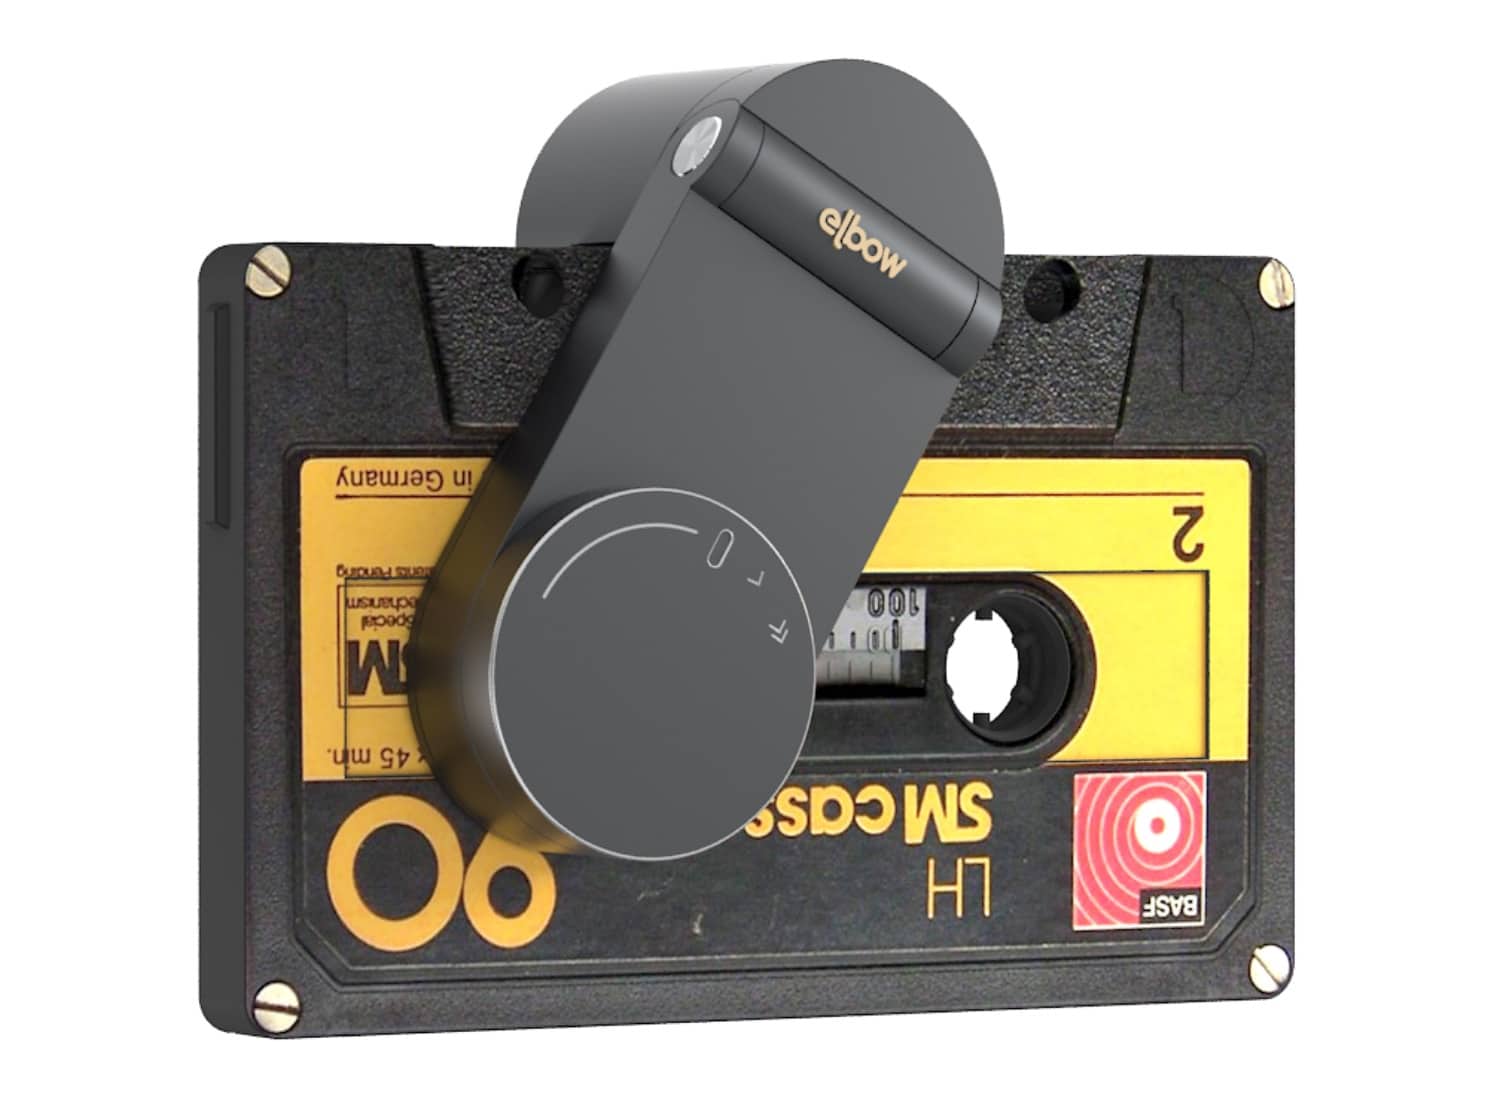 cassette tape players new